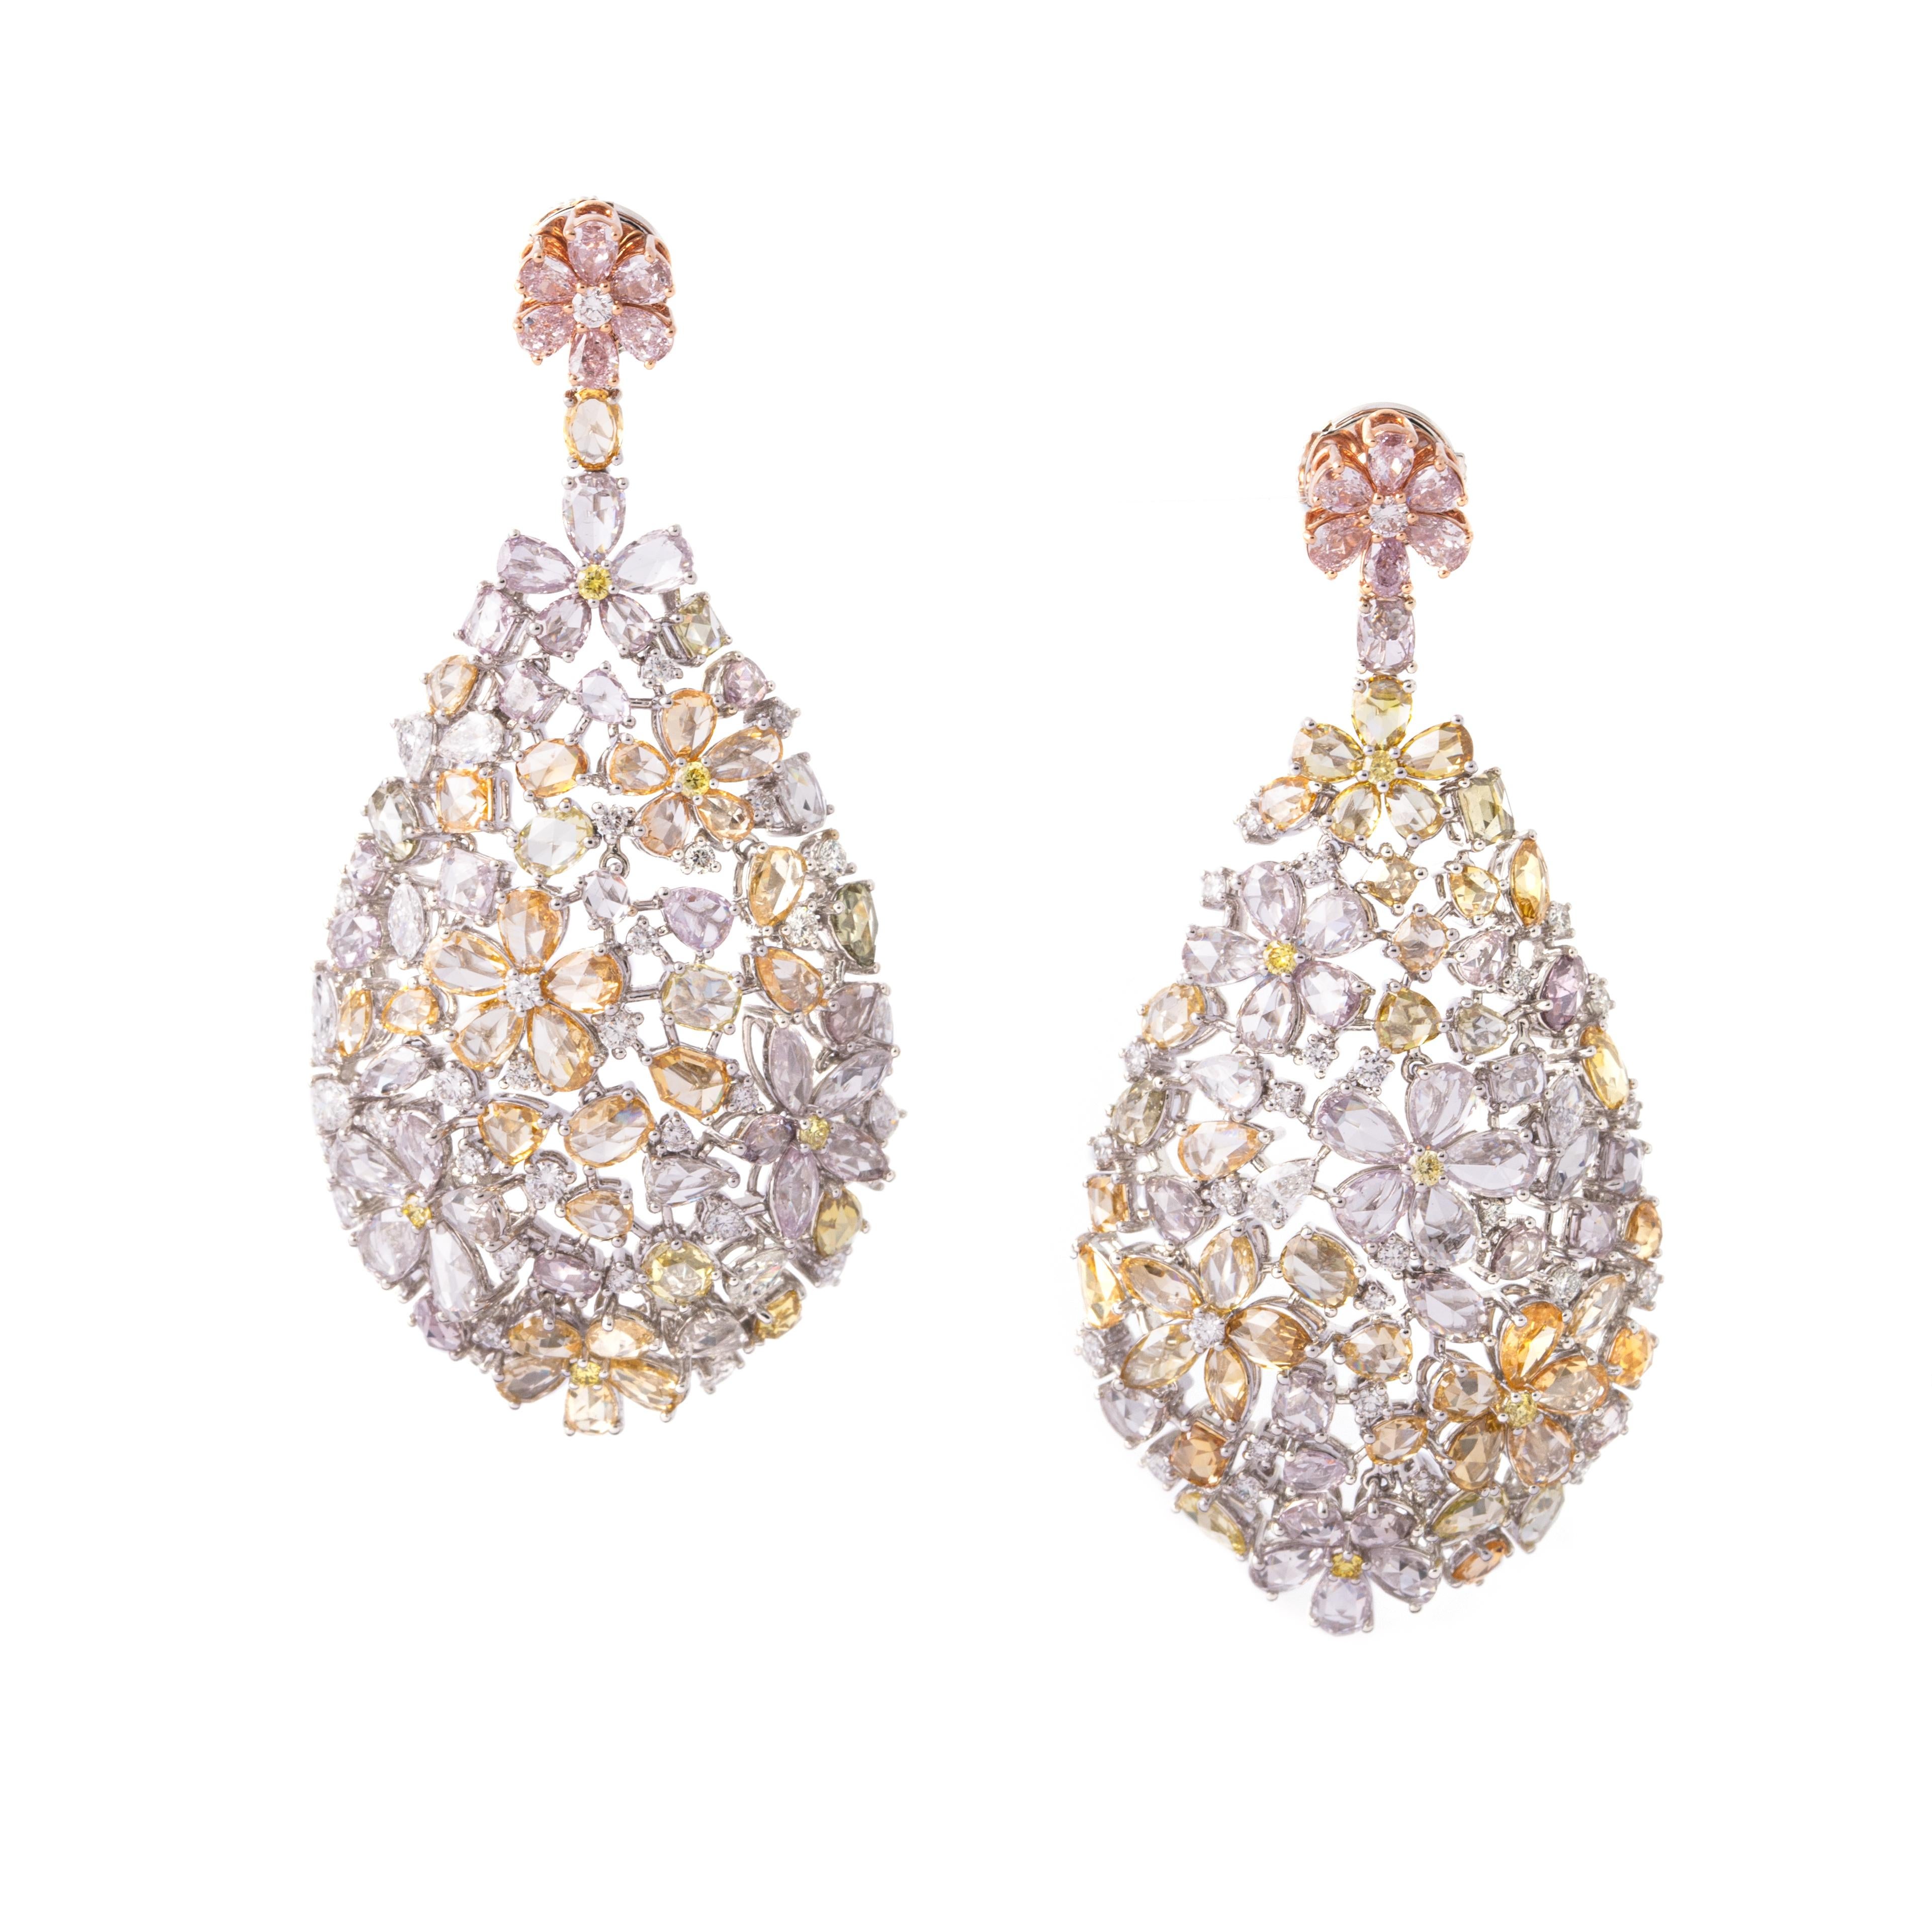 Fancy Color Diamond Flower 18K Gold Earrings.

Natural 148 pieces, 14.23 carats VS-F.
Natural yellow diamonds, round 10 pieces, 0.17 carats, VS.
Natuarl pear 6 pieces, 0.443 carats, VS-F.
Natural marquise 4 pieces, 0.211 carats, VS-F.
Natural round